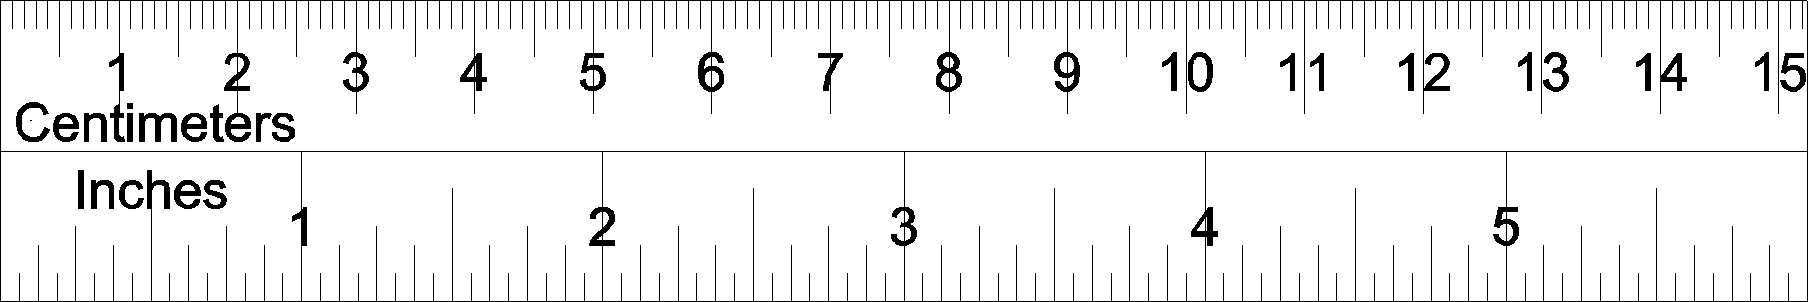 6 Inch ruler (GIFfile)